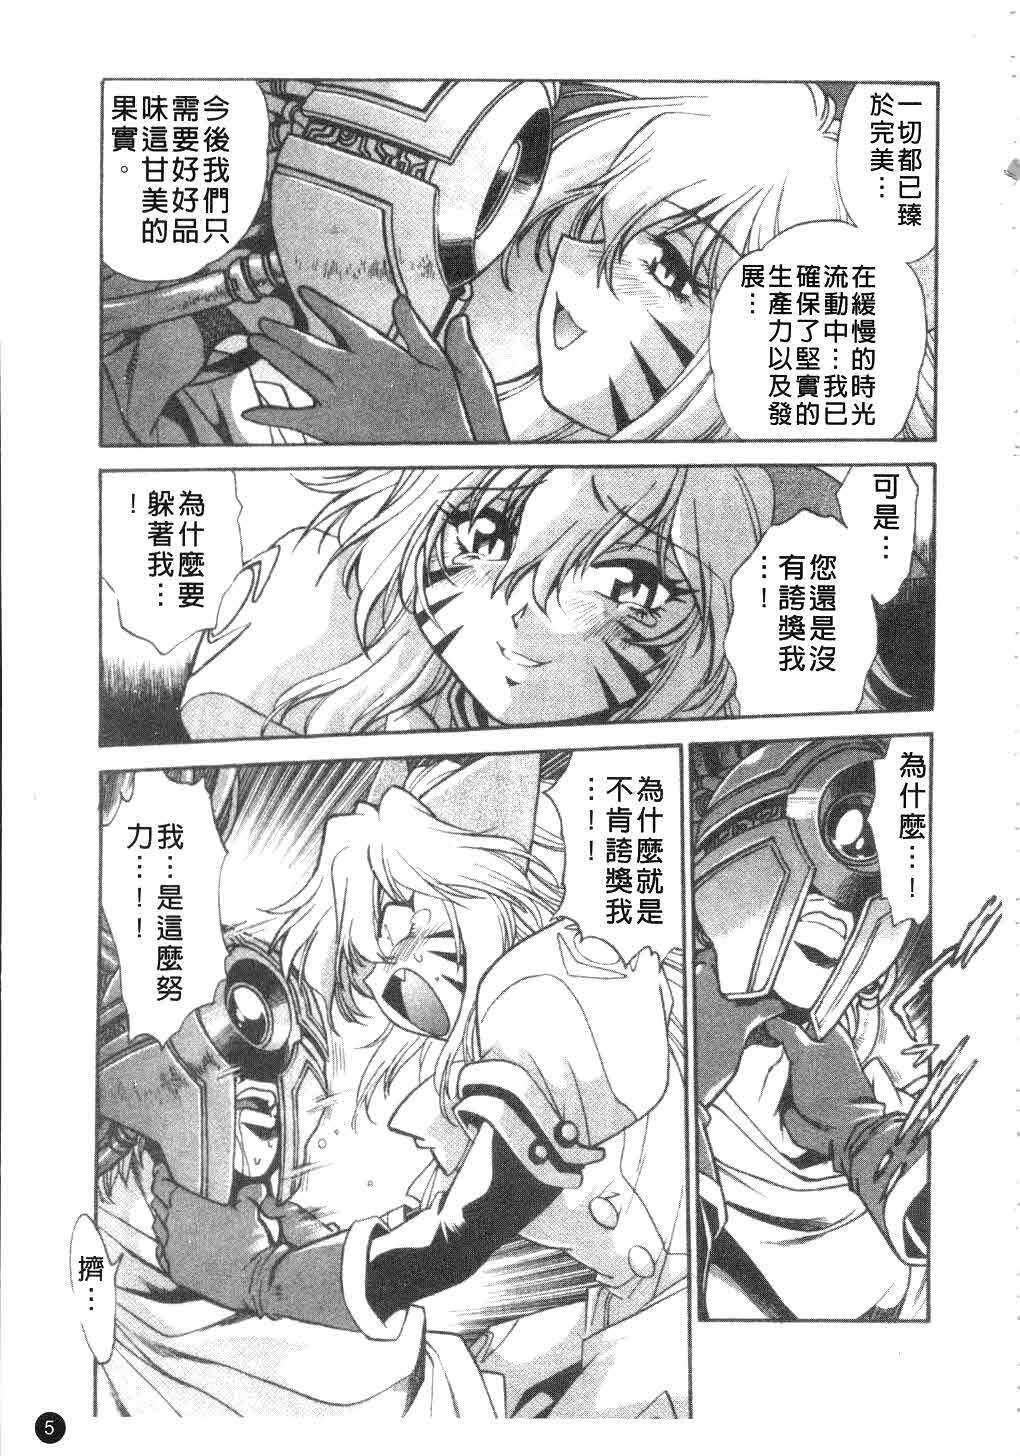 [Manabe Jouji] Tail Chaser 3 | 貓女迷情 3 [Chinese] page 6 full